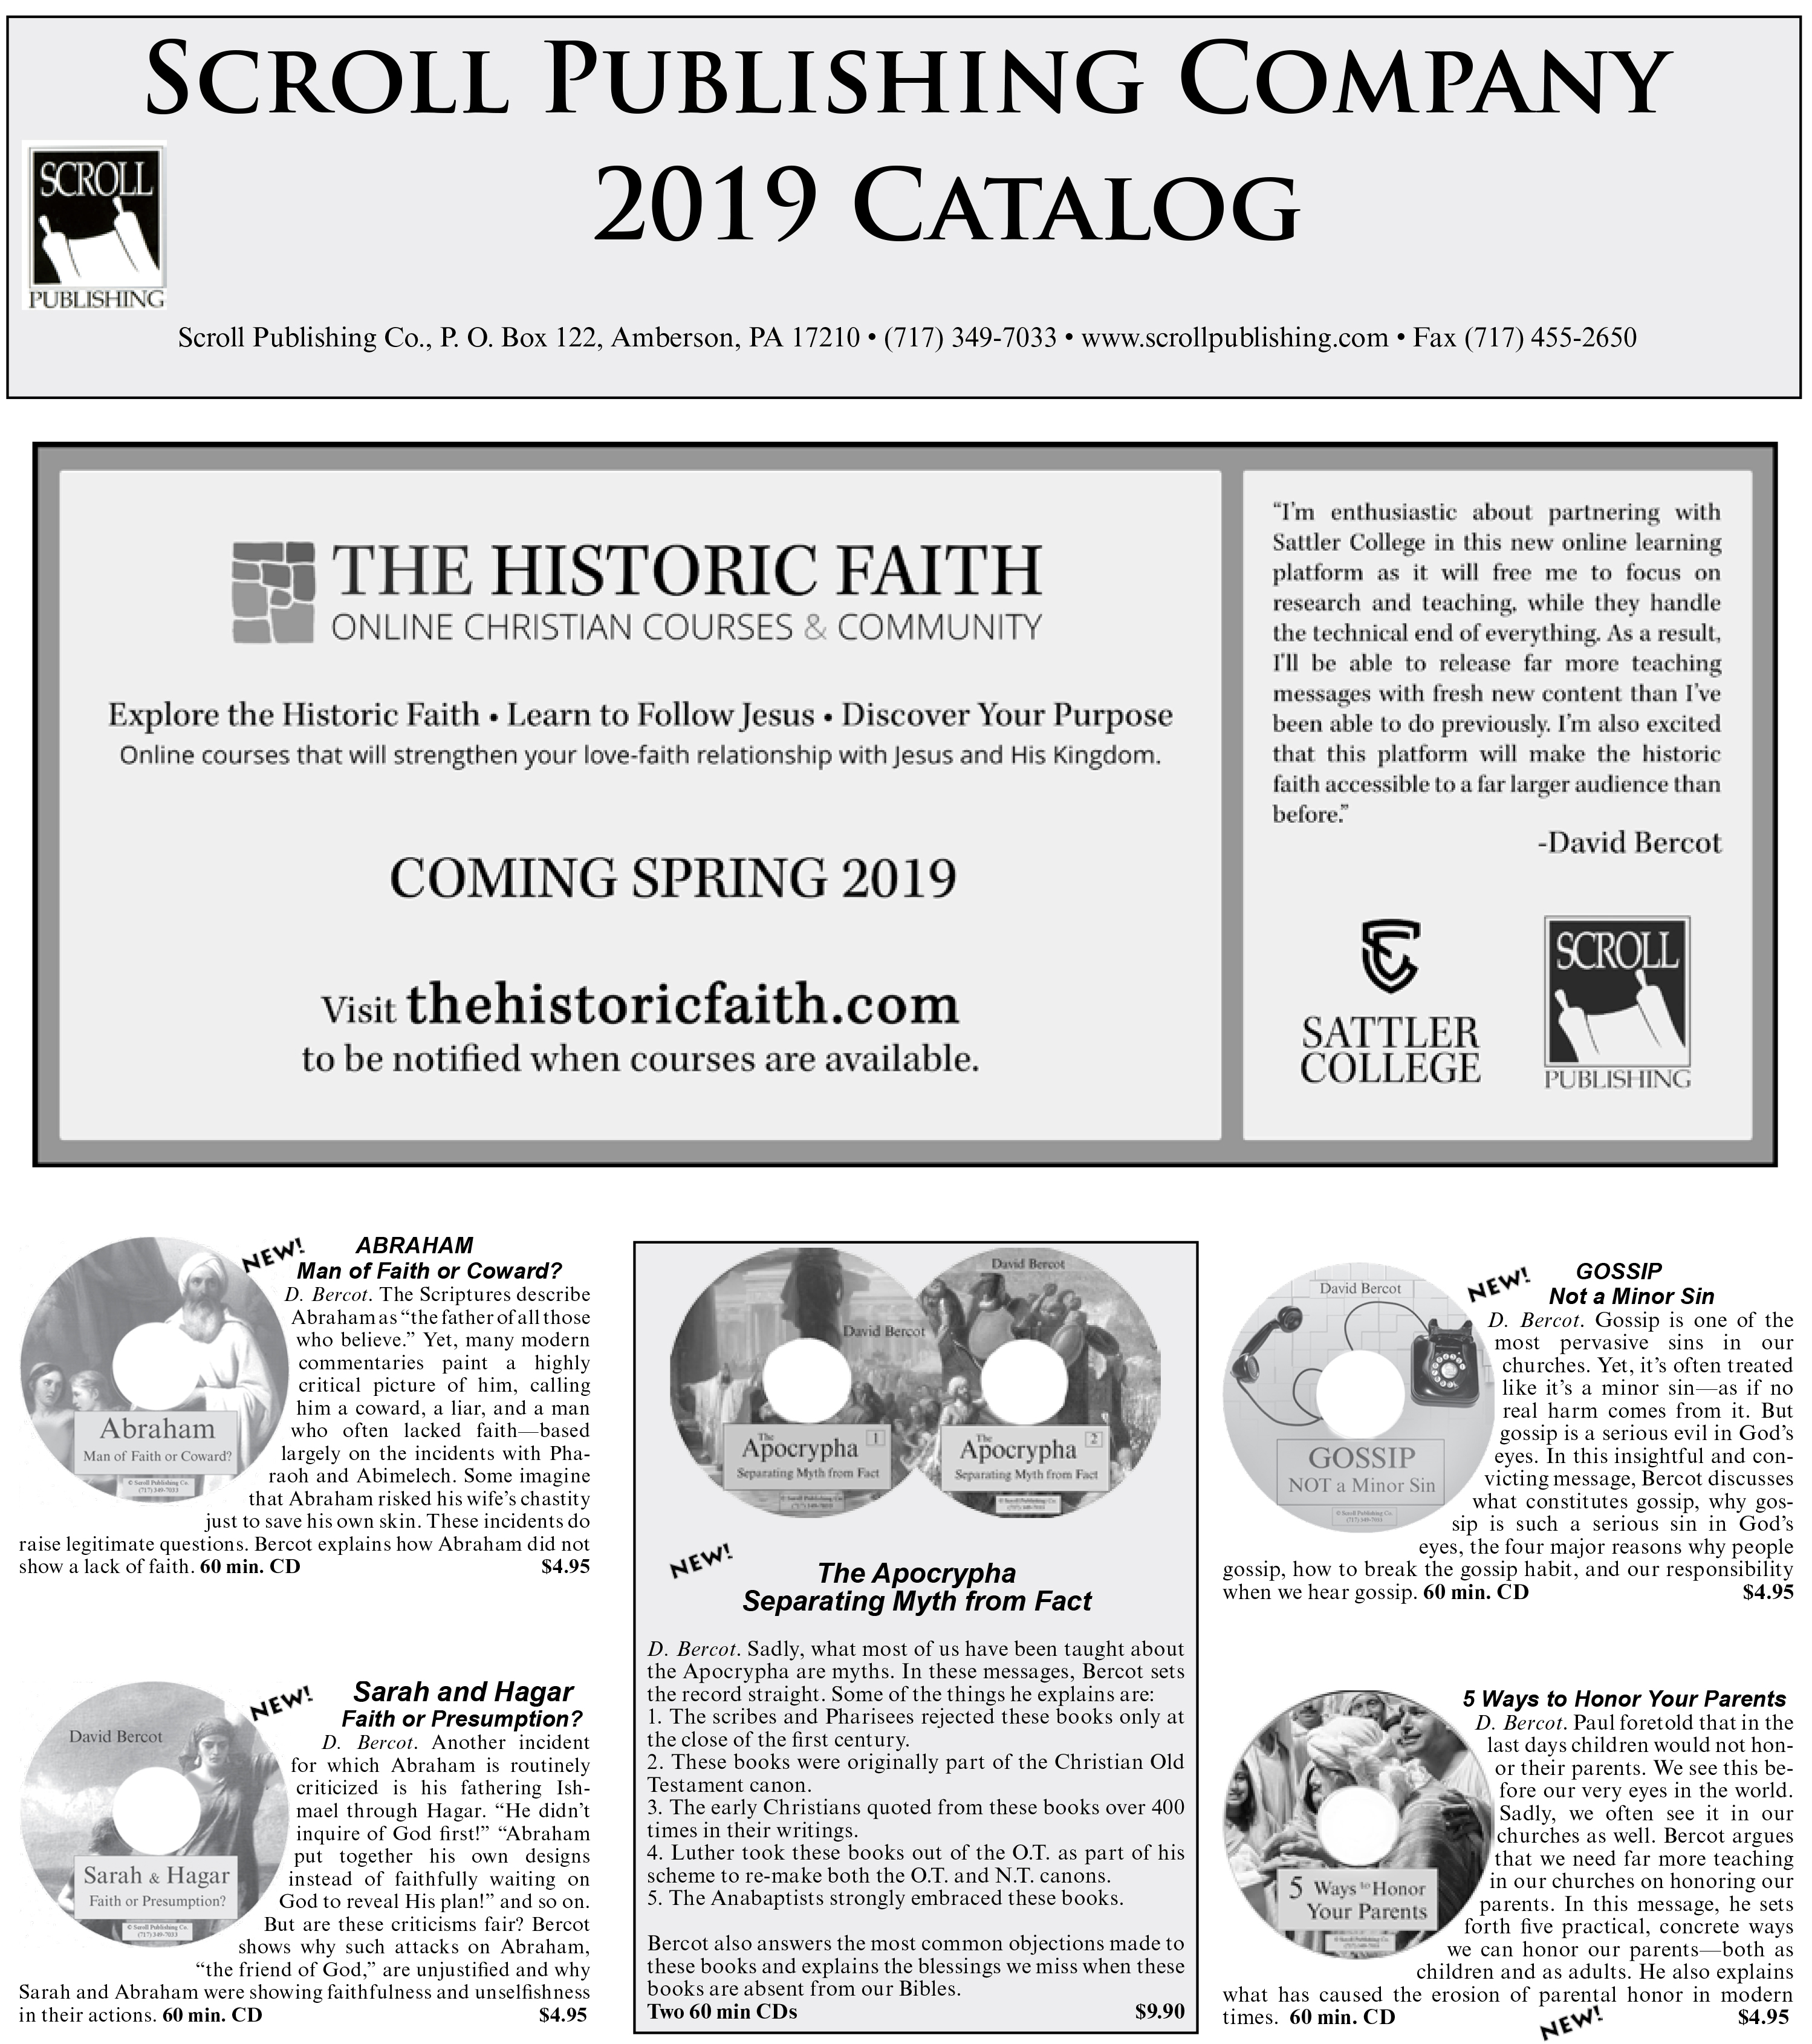 Free Catalog on Early Christians